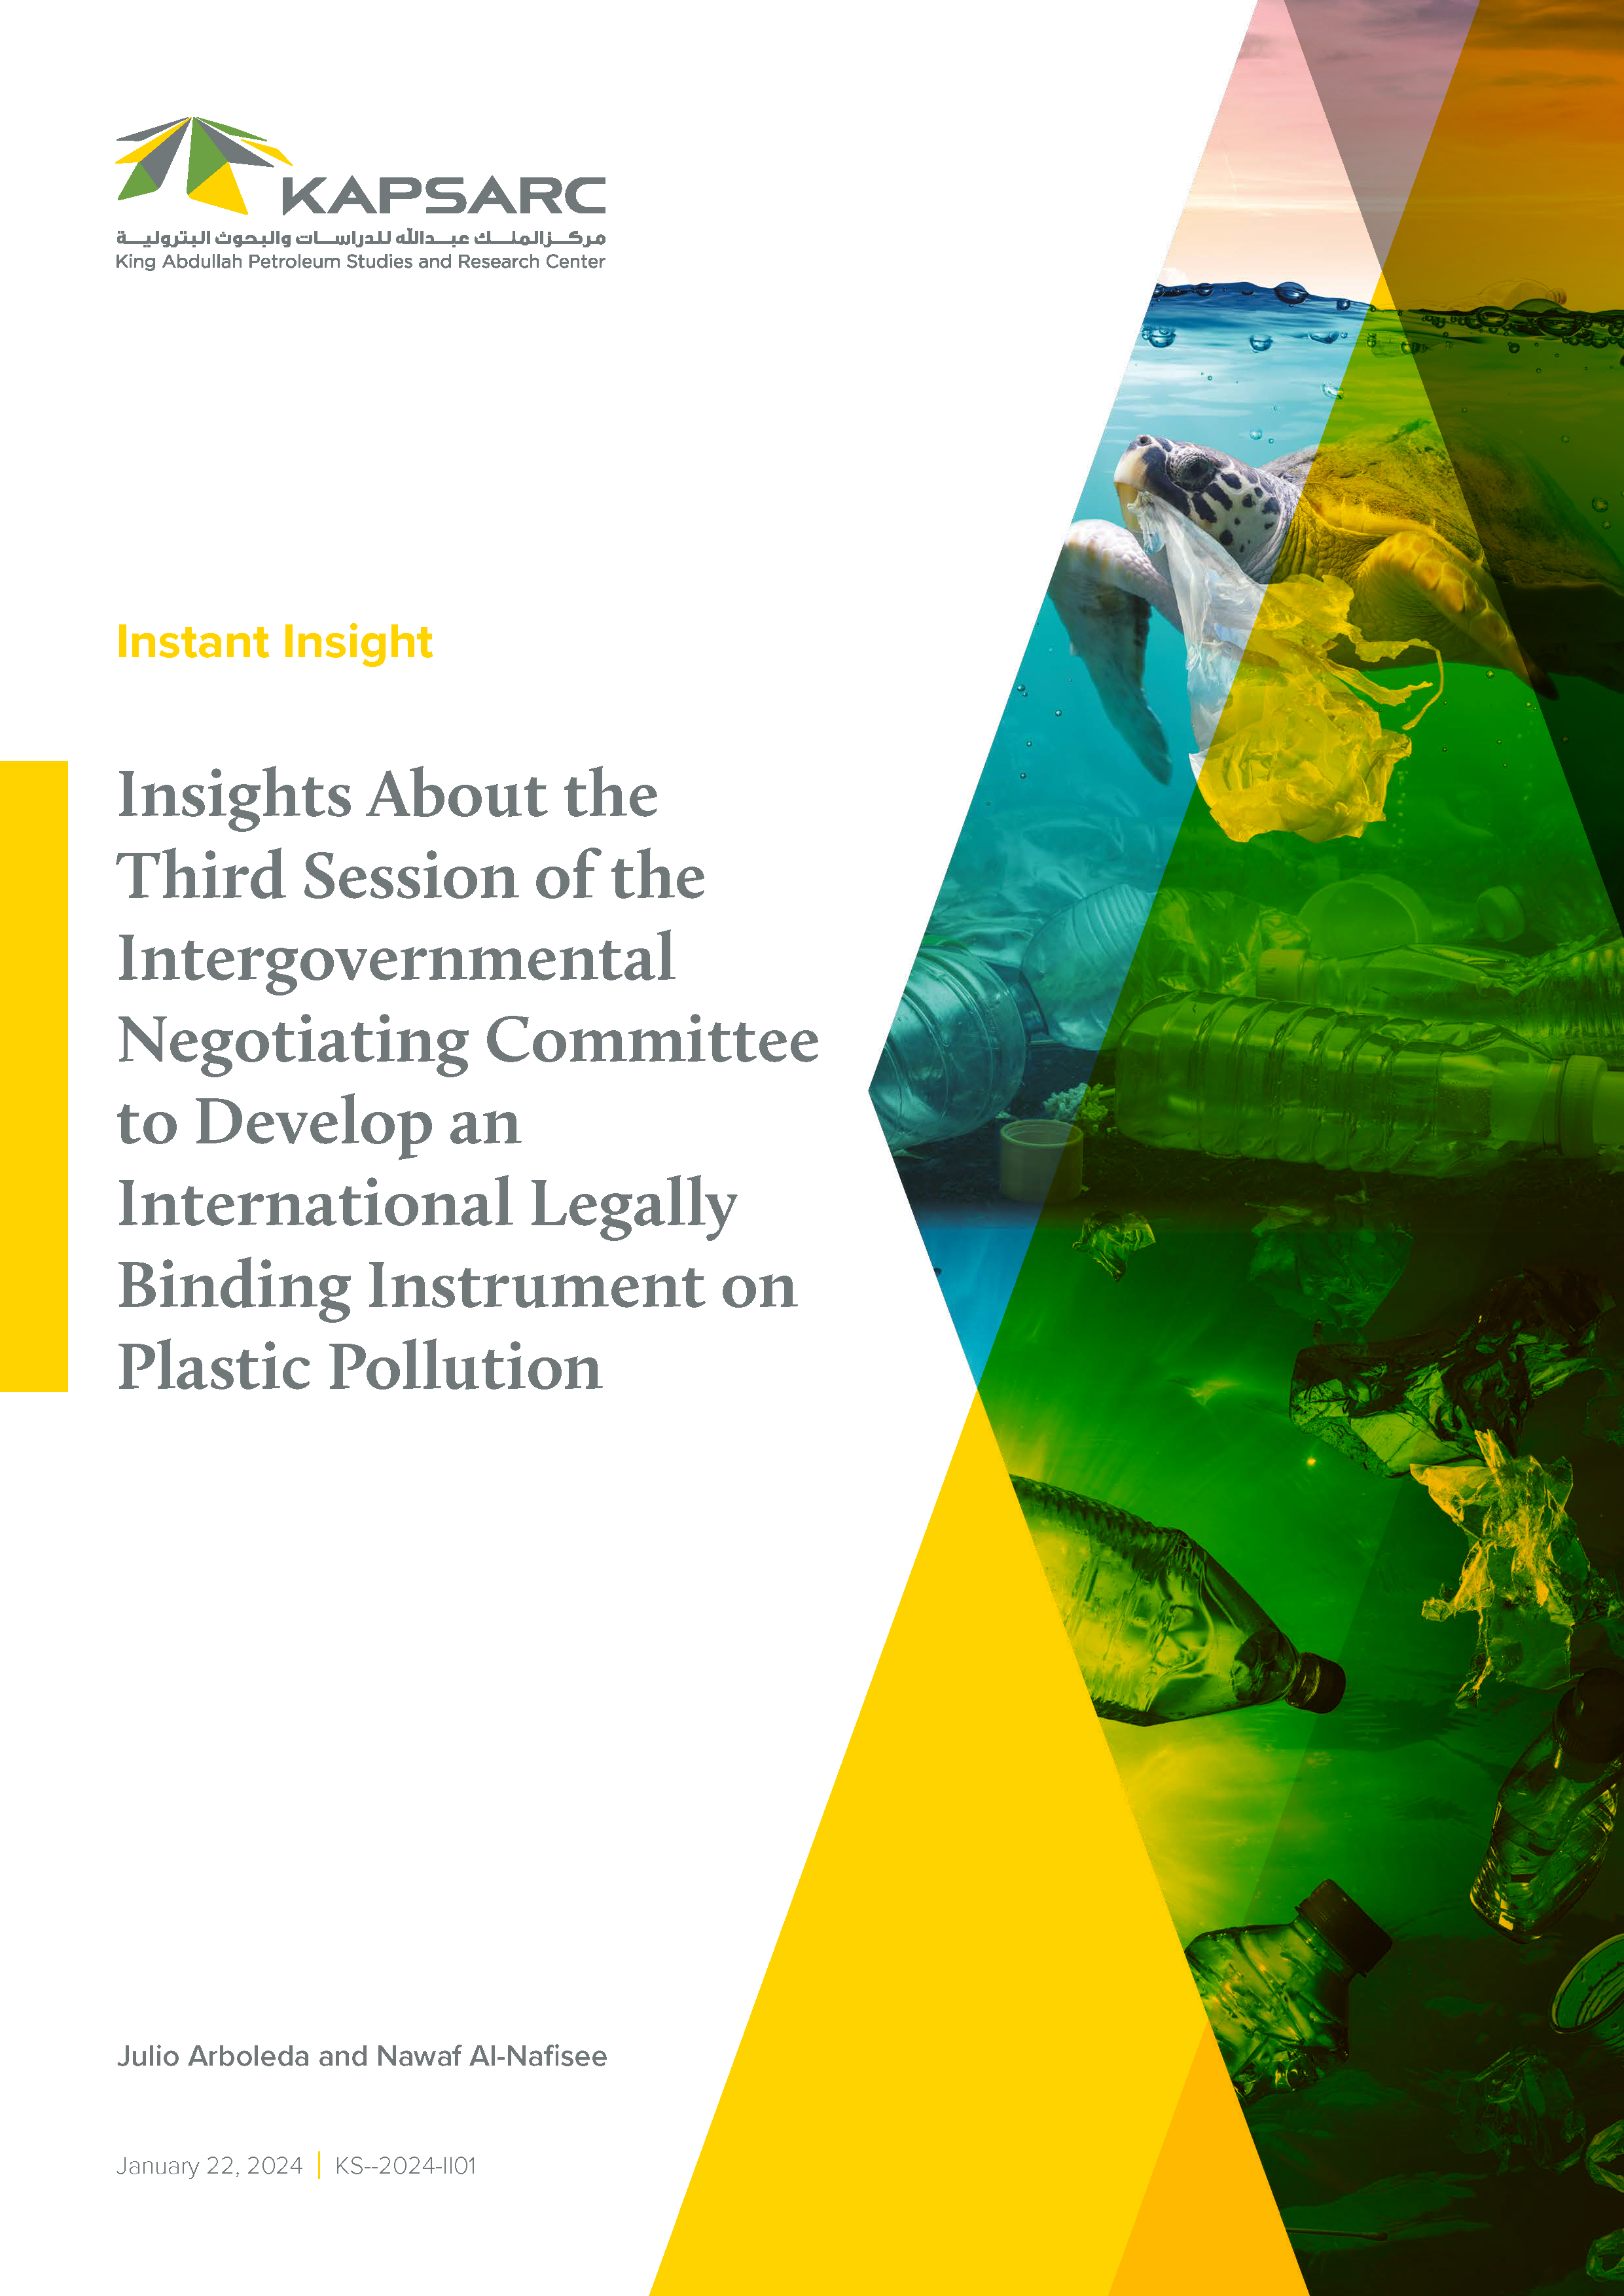 Insights About the Third Session of the Intergovernmental Negotiating Committee to Develop an International Legally Binding Instrument on Plastic Pollution